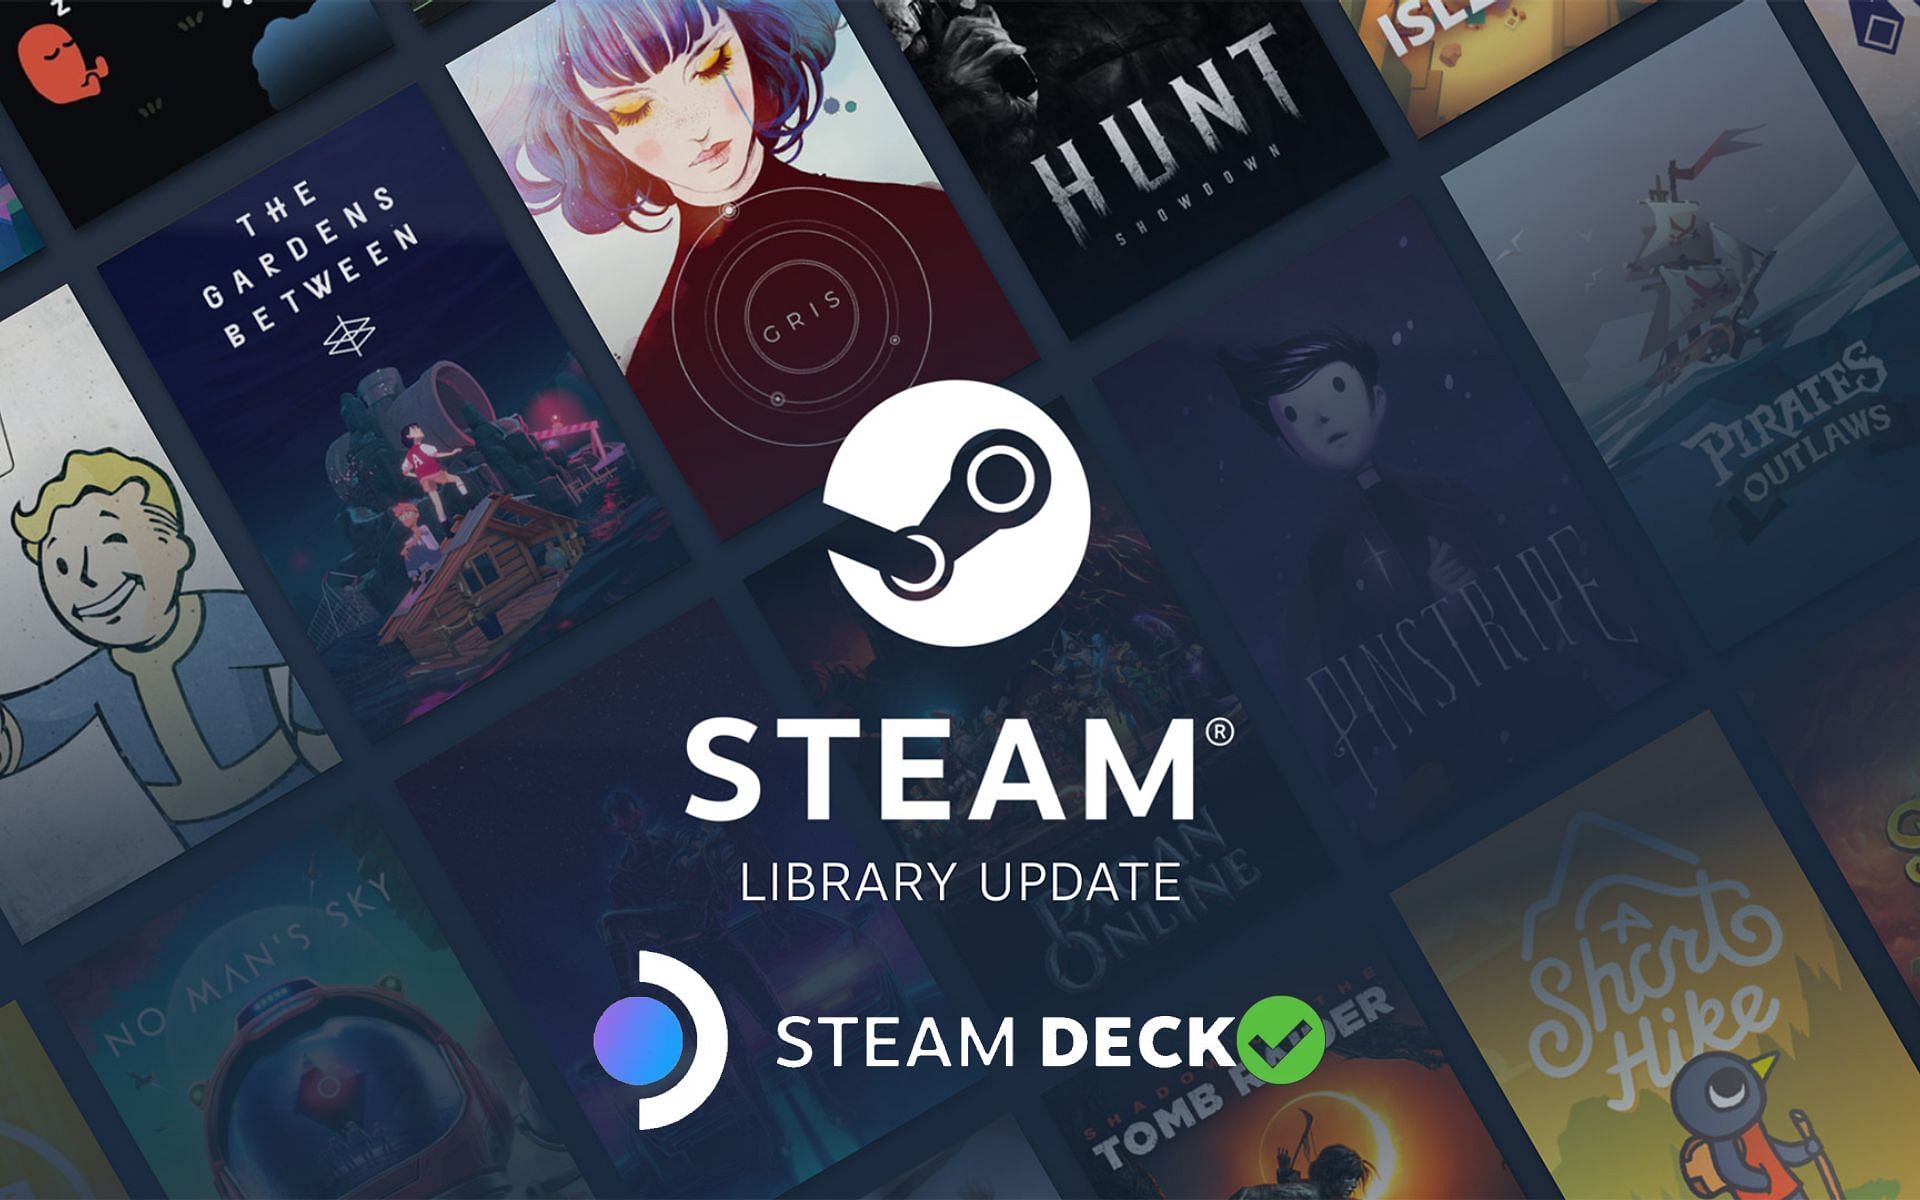 Steam Deck has launched with nearly 900 playable and verified games (Image by Valve)